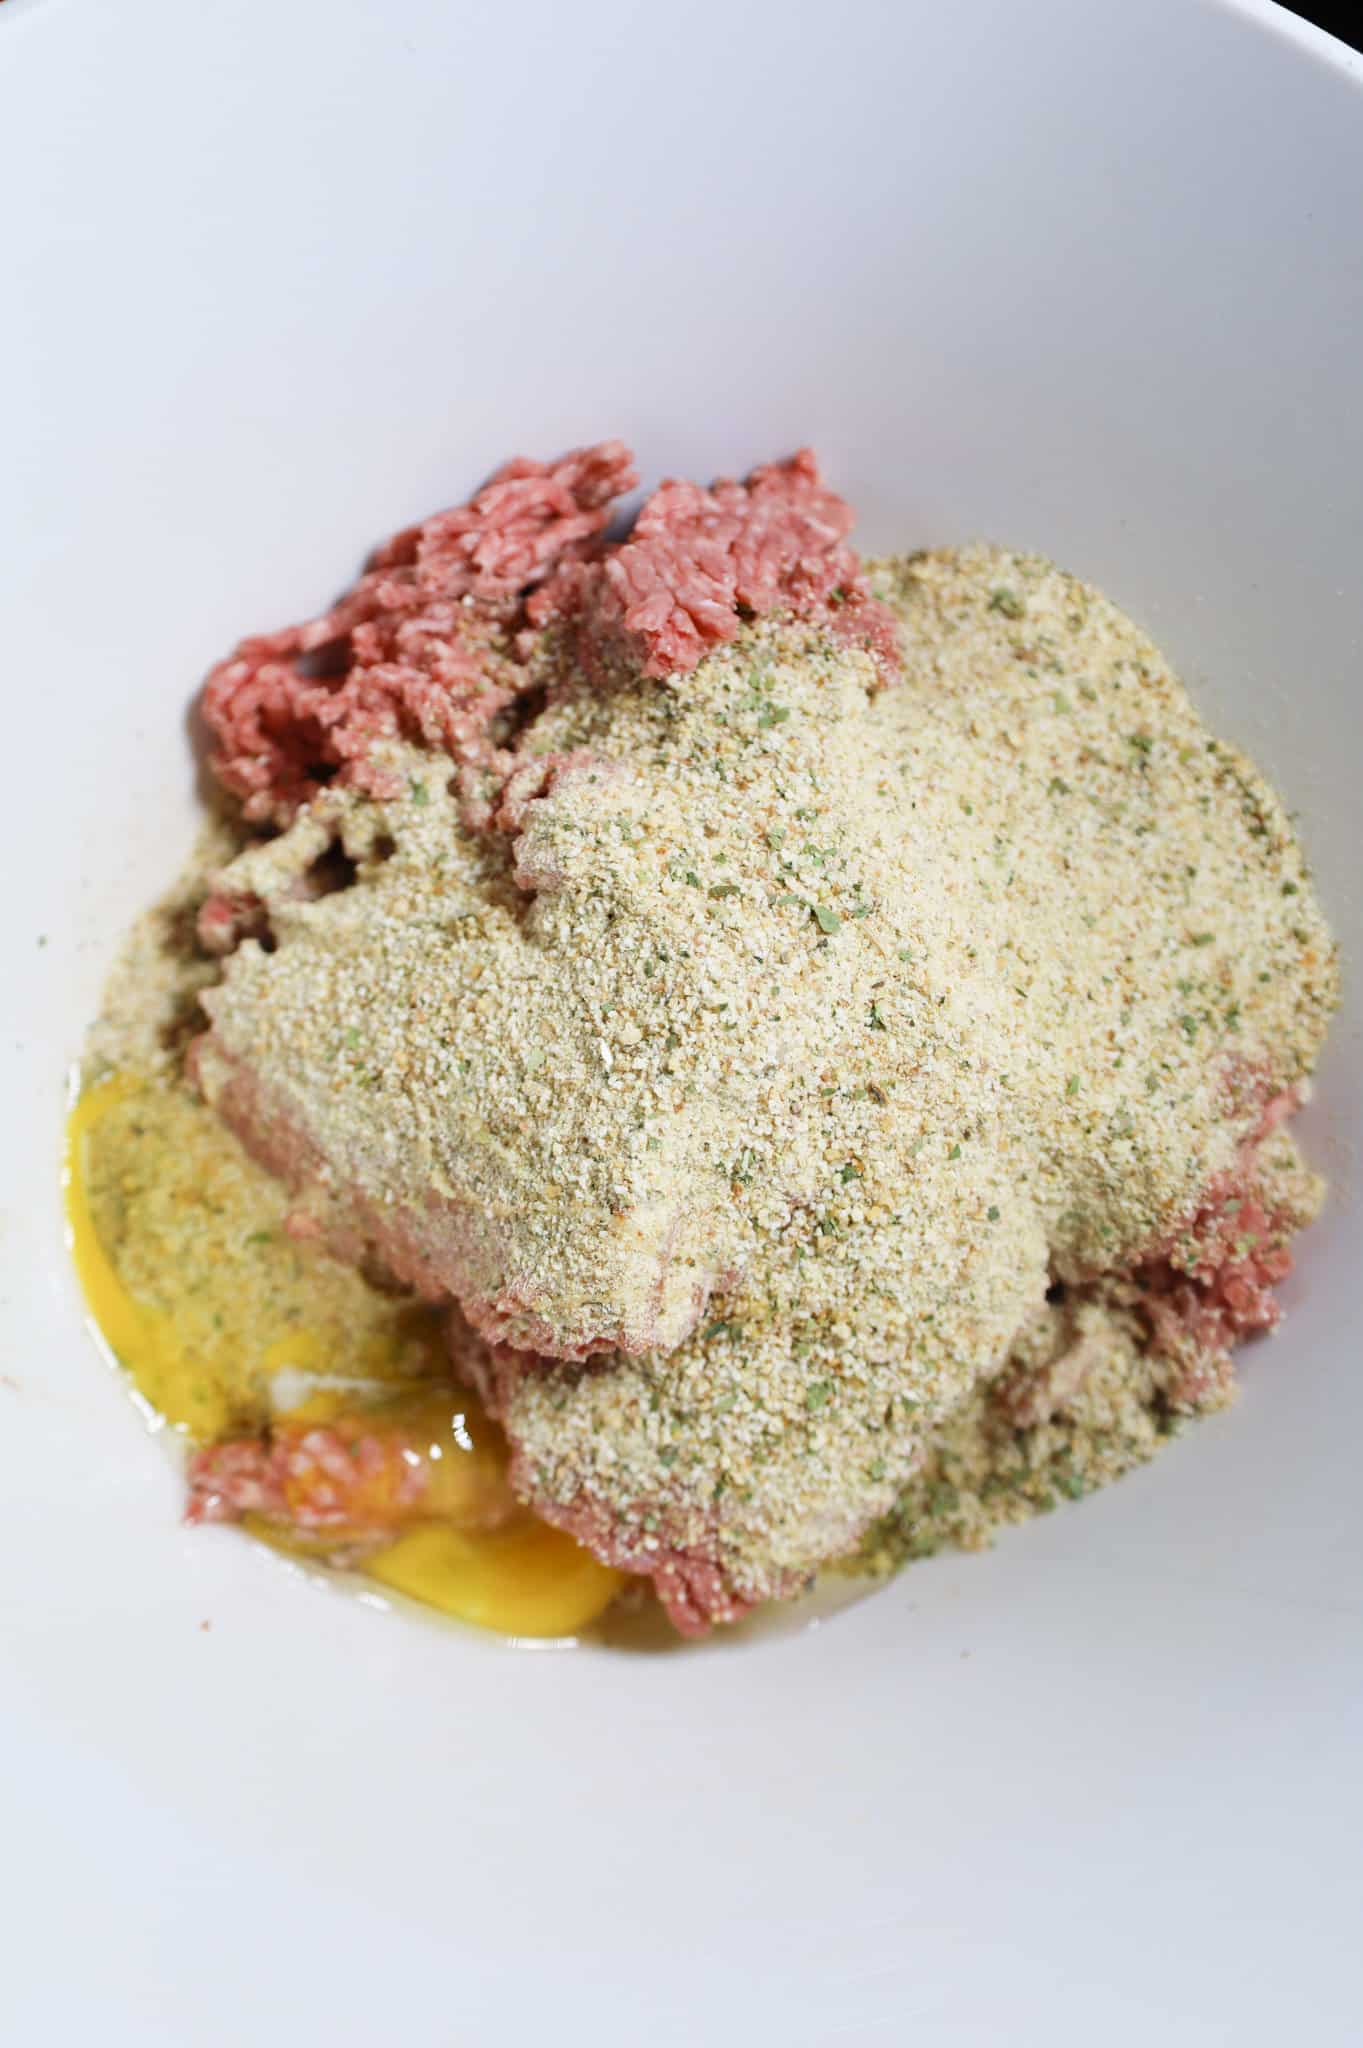 eggs and Italian bread crumbs on top of raw ground beef in a mixing bowl